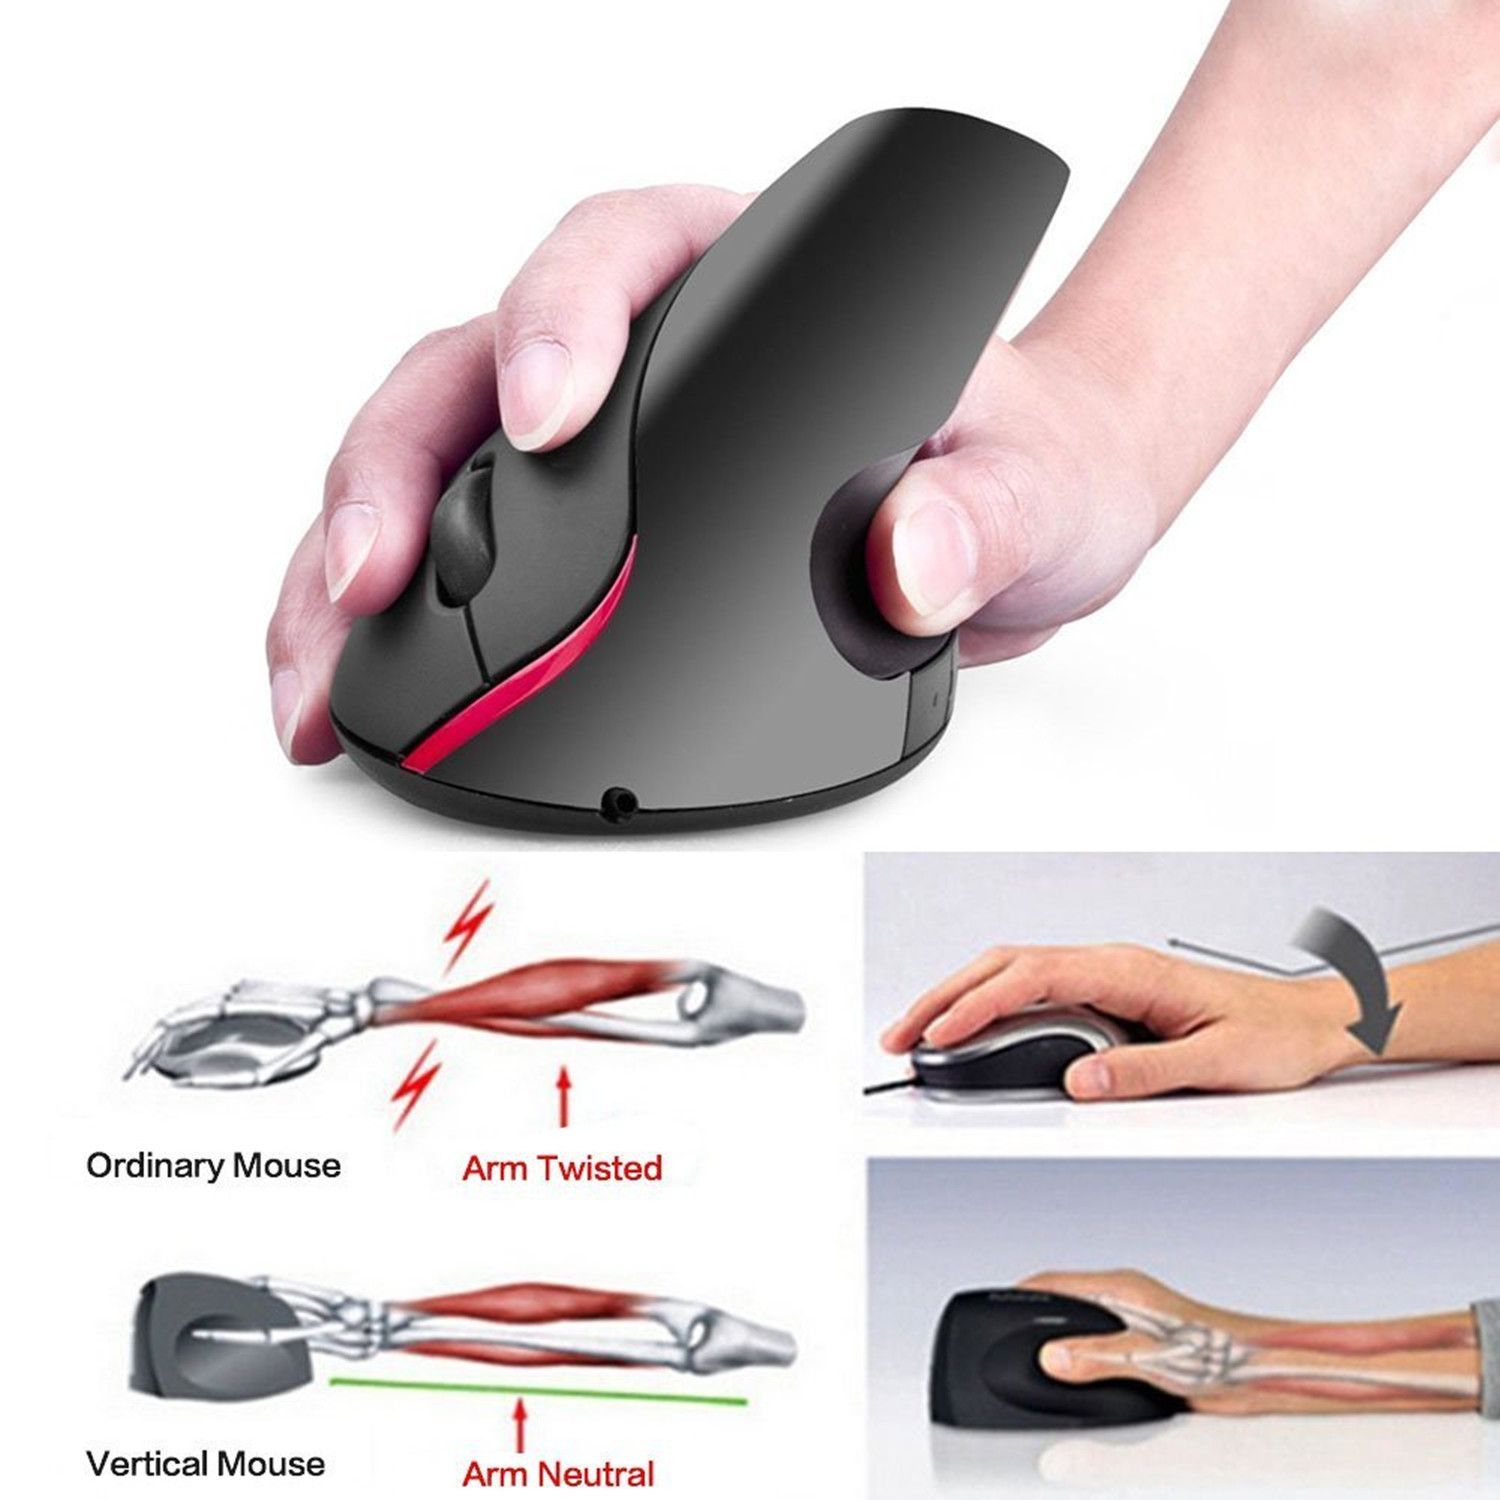 HXSJ-A889-24GHz-Wireless-Rechargeable-Vertical-Gaming-Mouse-Ergonomic-Design-2400DPI-Mice-1395978